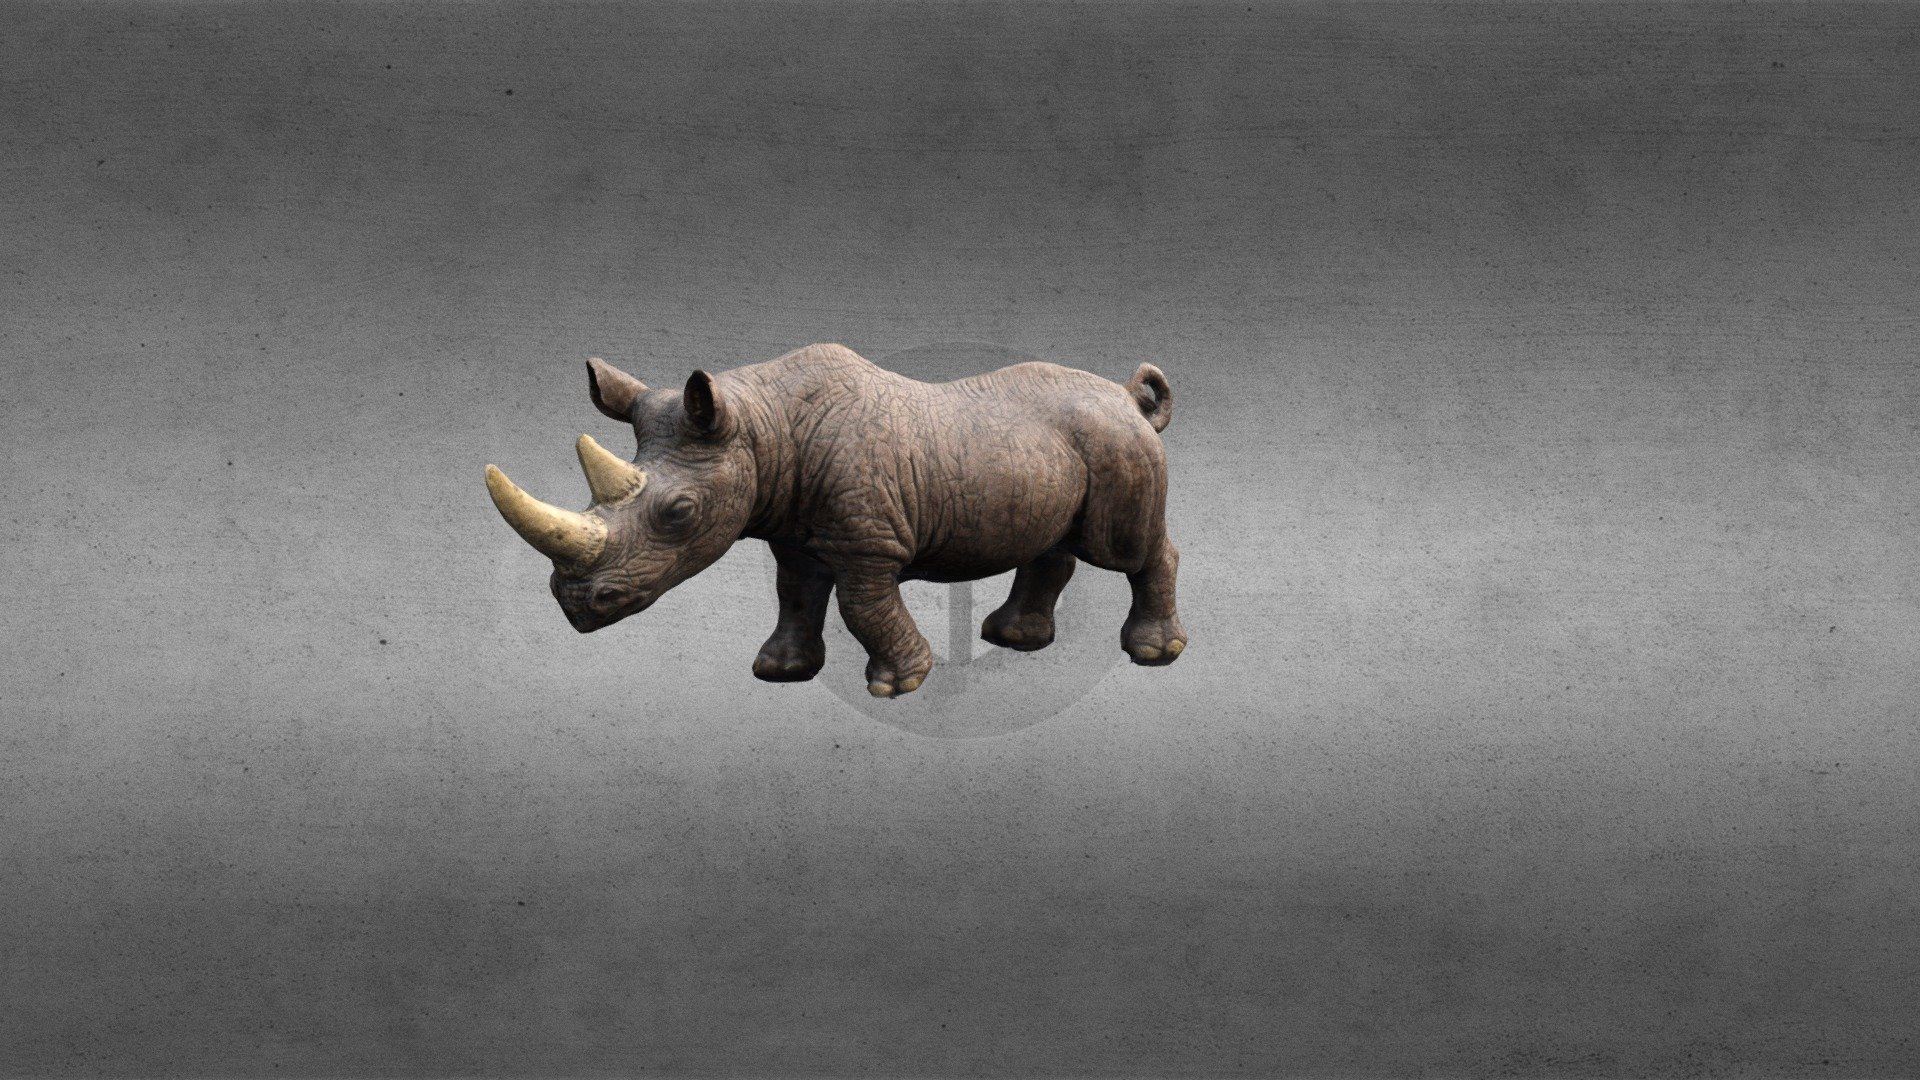 Rhinoceros 3D 7.30.23163.13001 download the new version for iphone